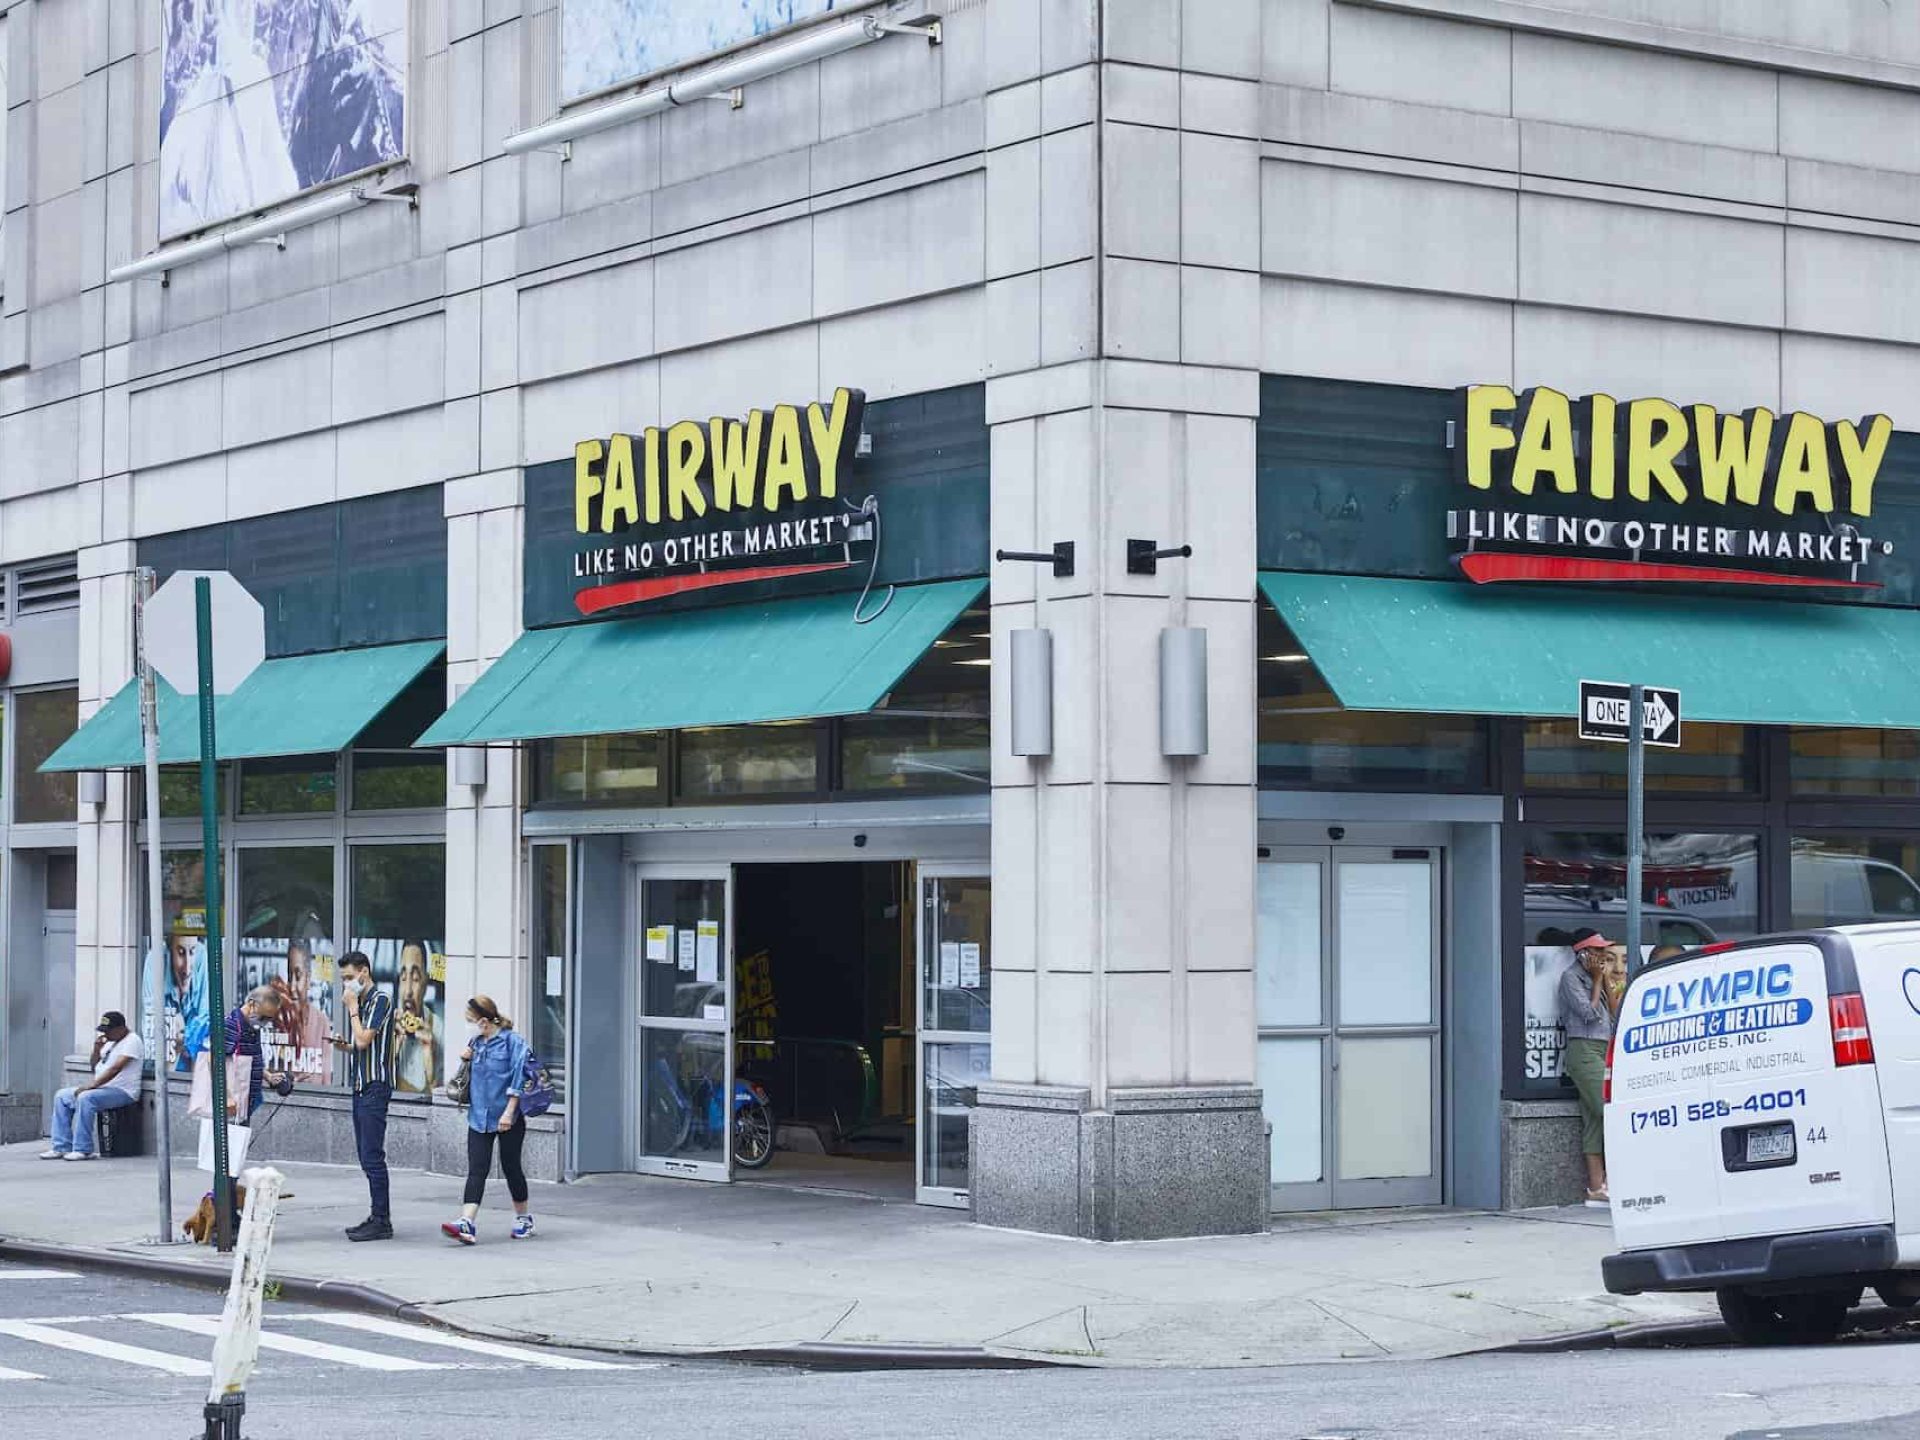 Corner view of Fairway Market in Murray Hill. Open sliding doors covered by green awnings and people on the street.